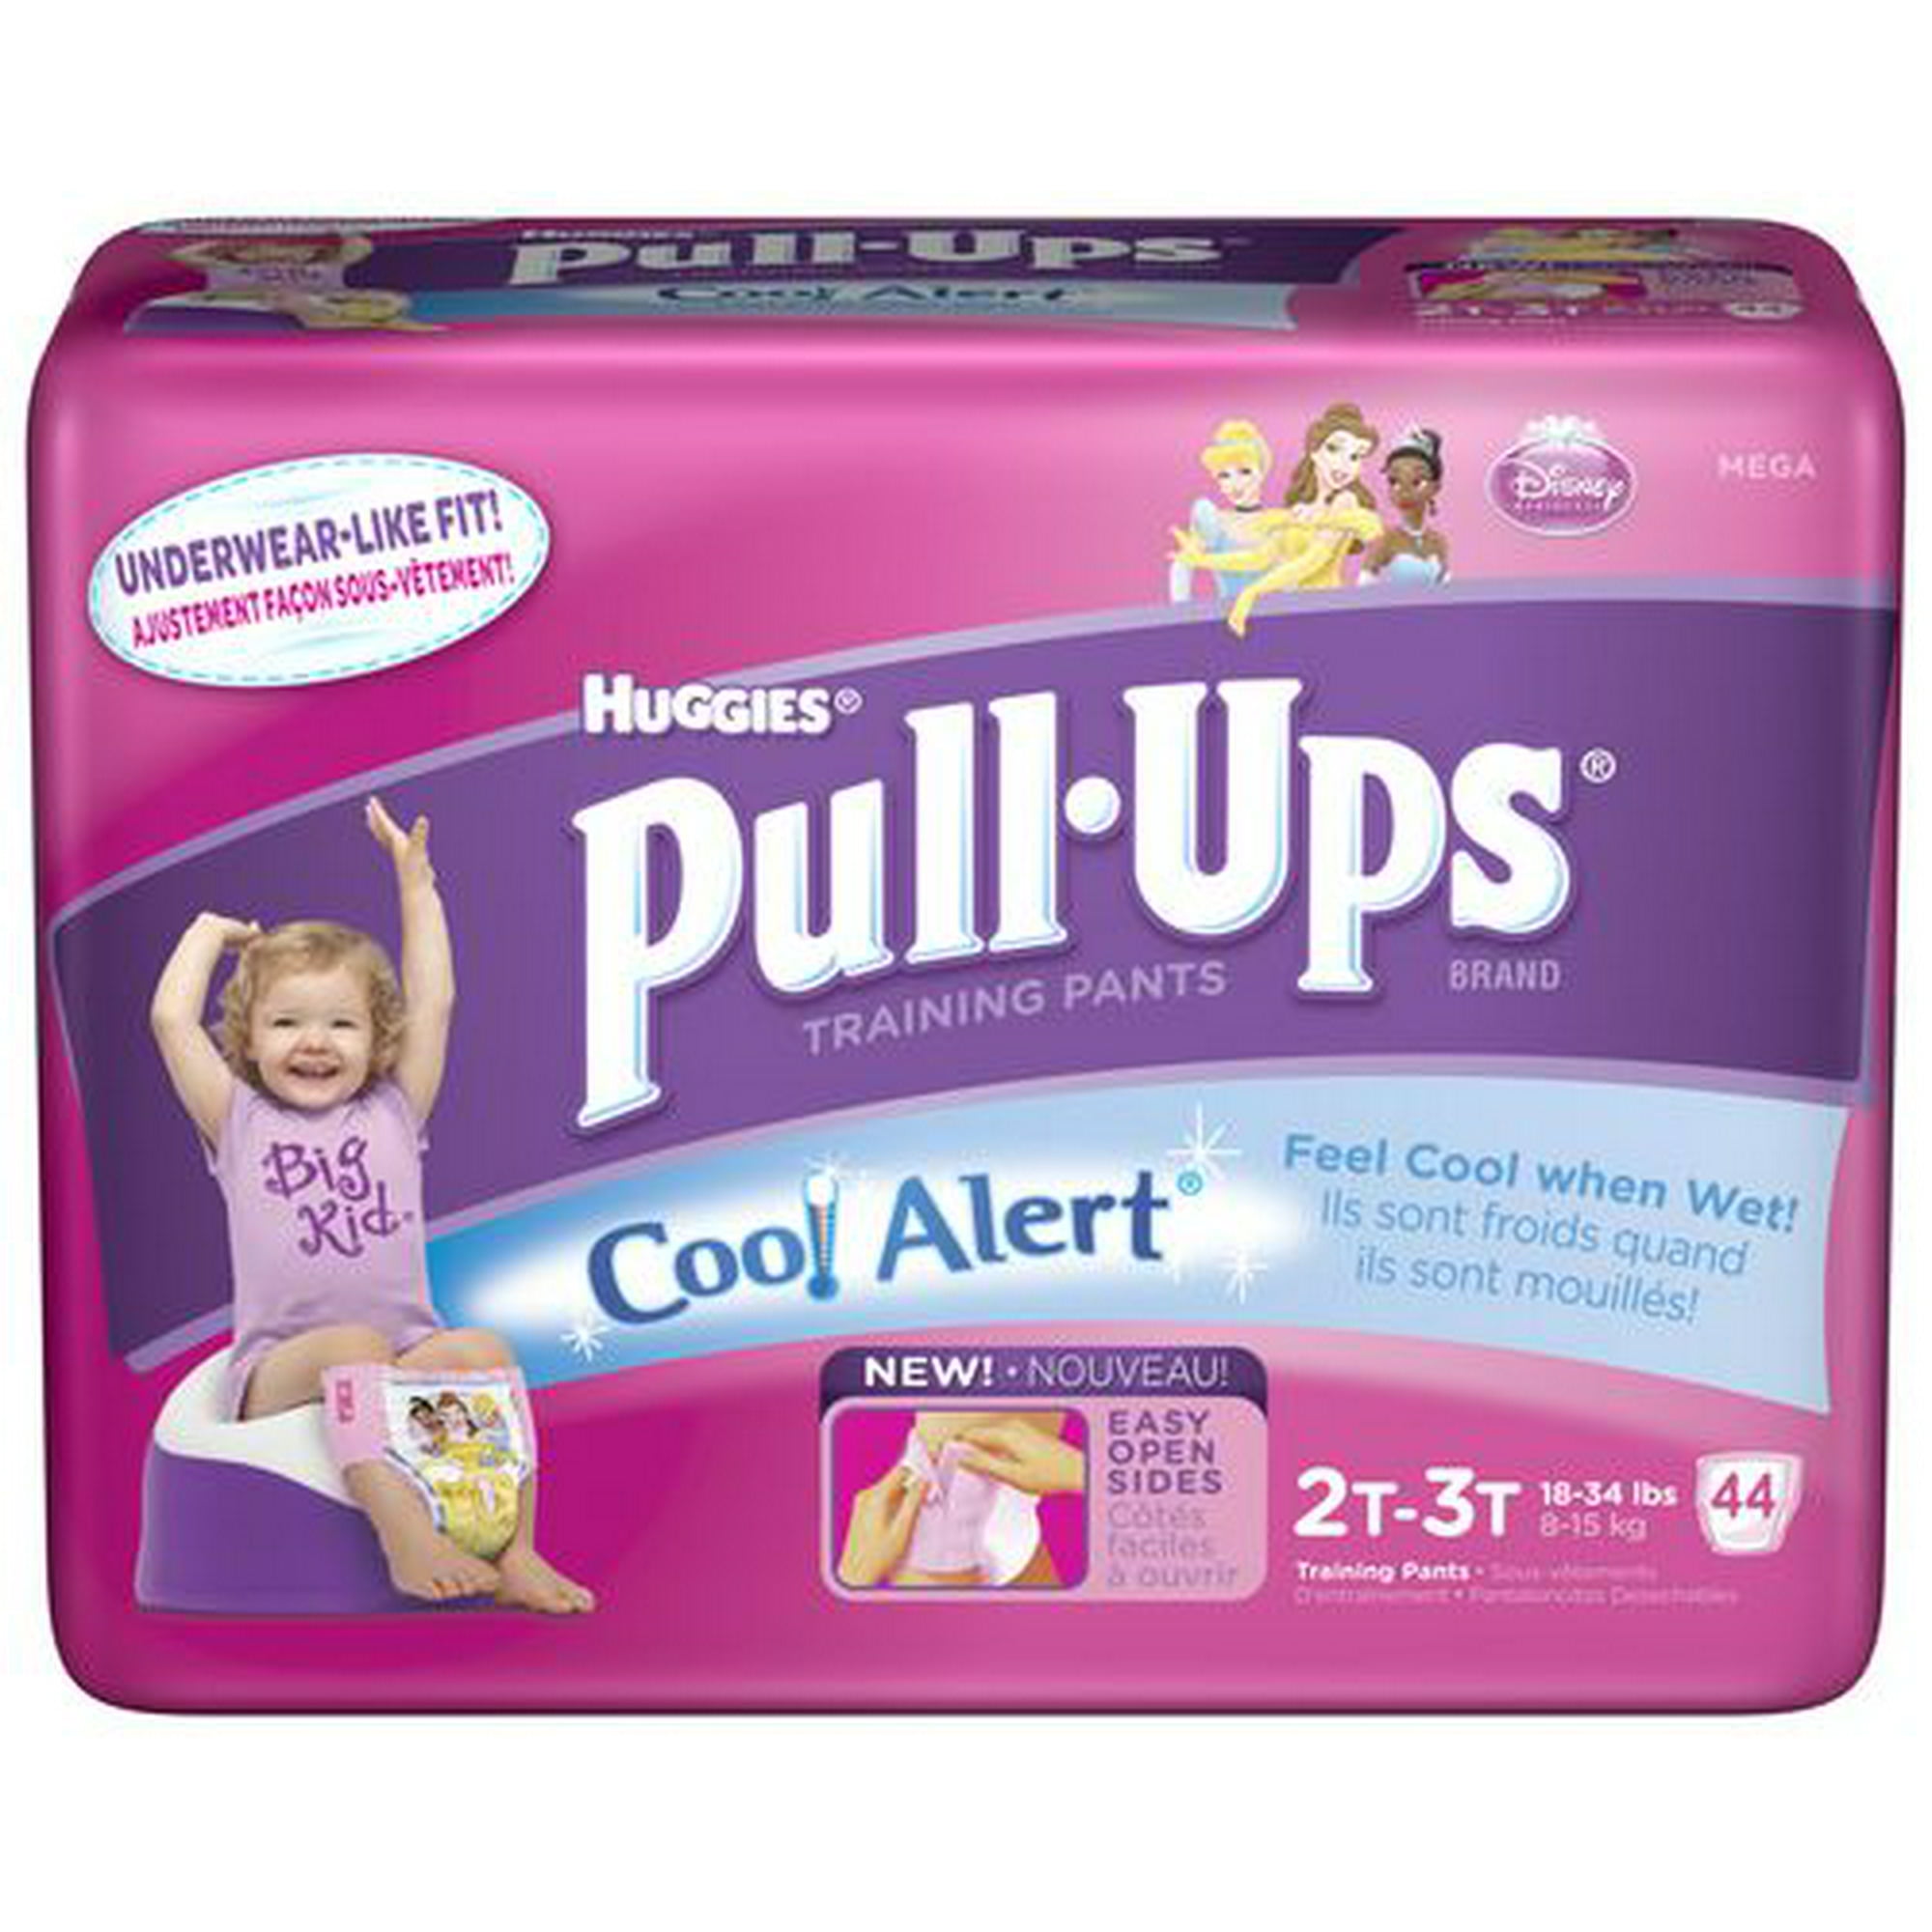 Huggies Pull-Ups Traning Pants in Cases